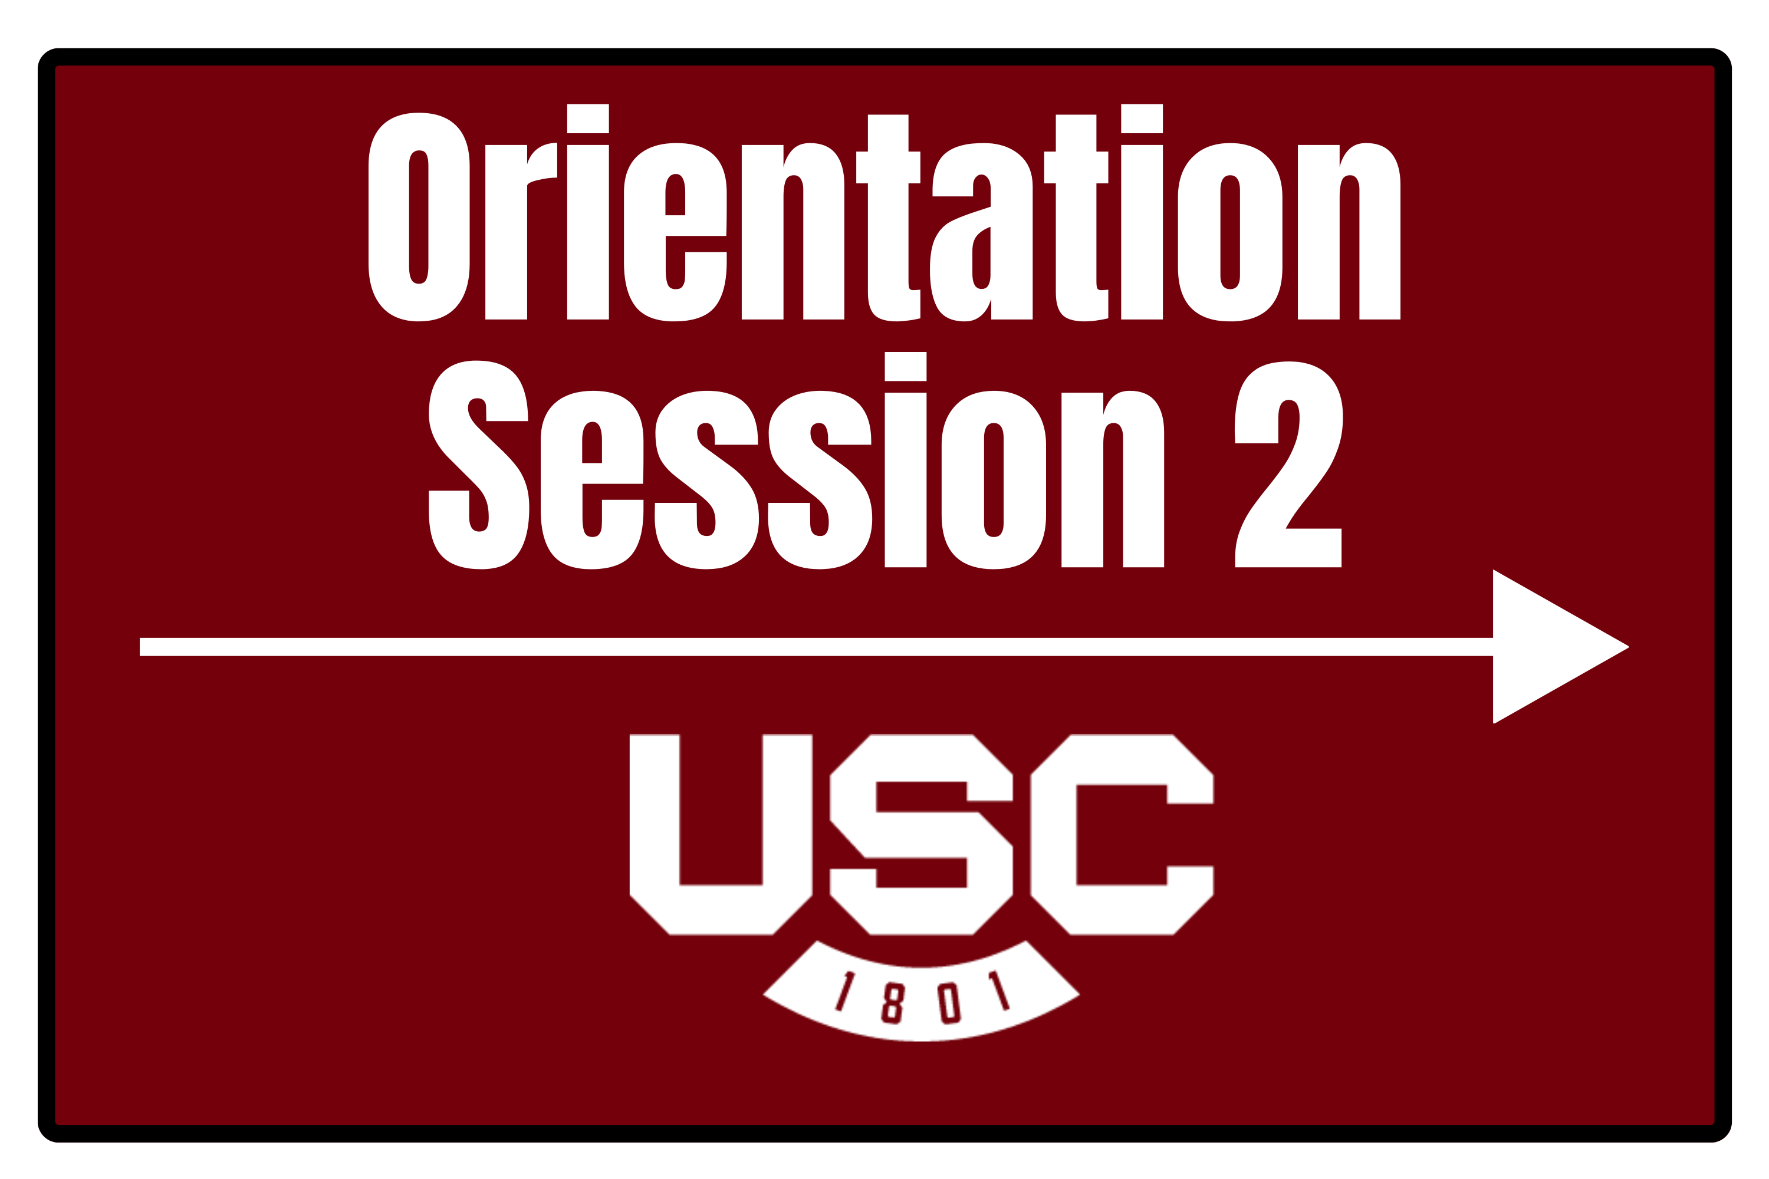 Orientation Session 2: May 30 - 31